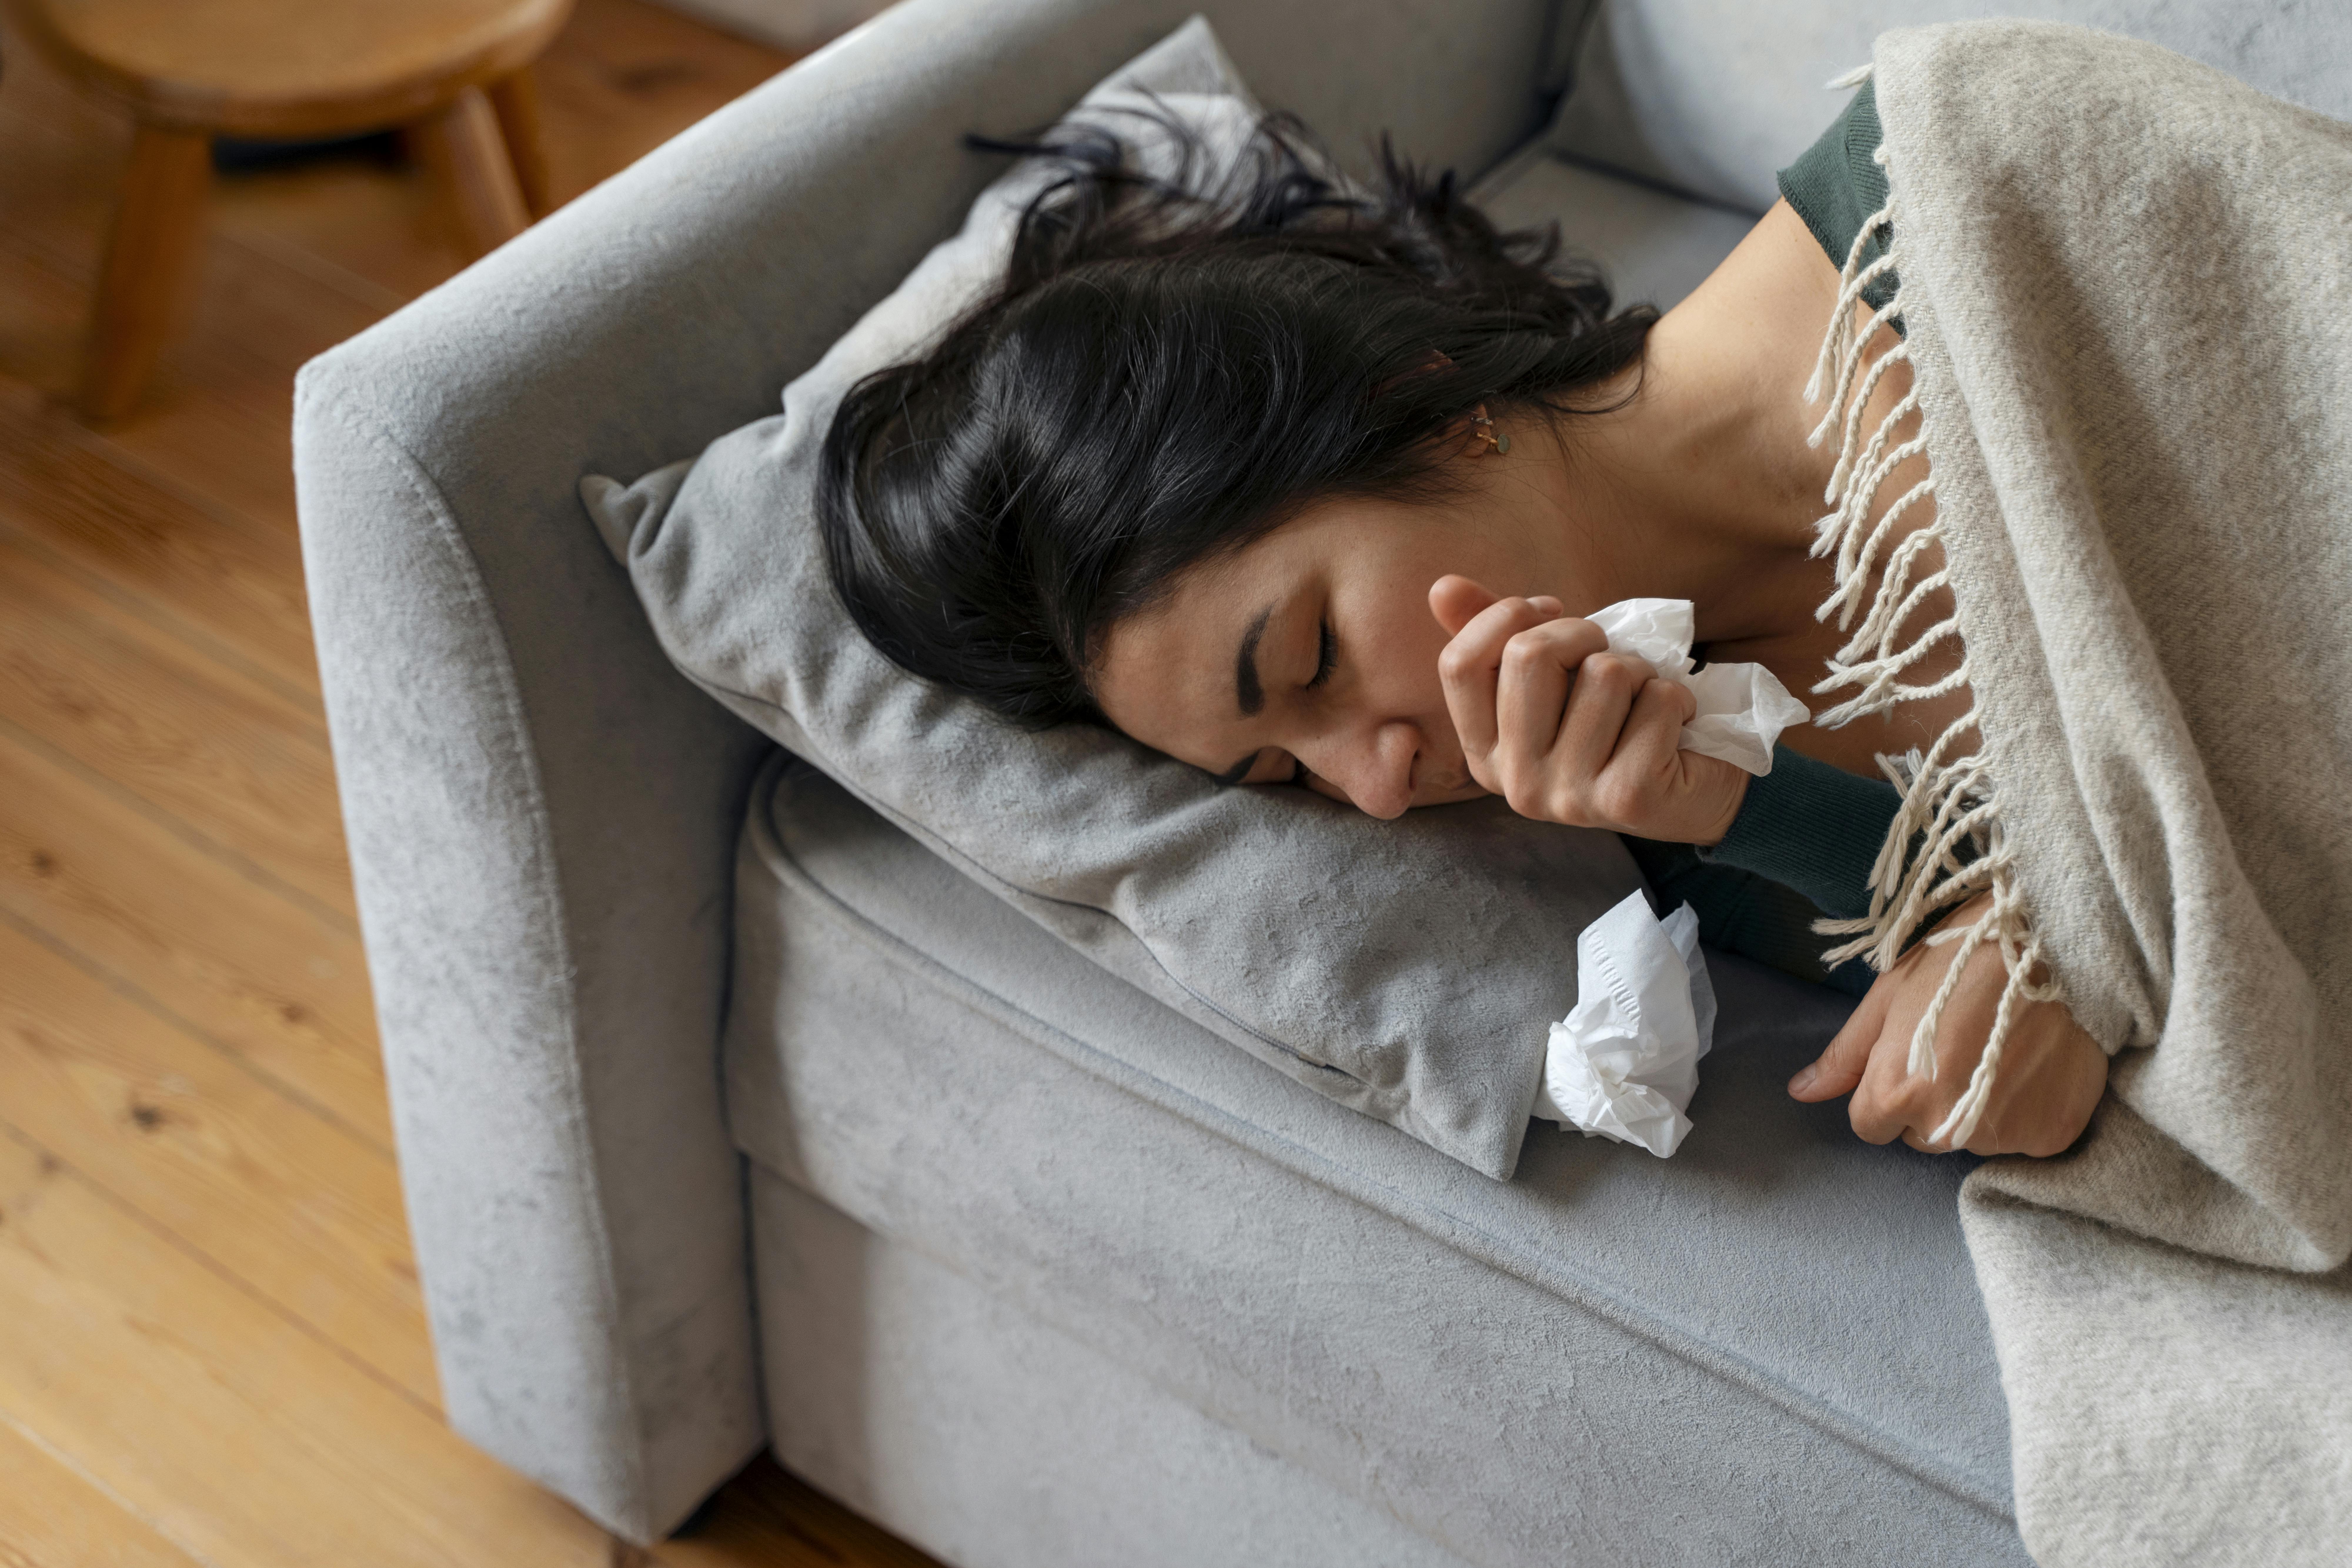 Woman is sick and asleep on a couch with tissues in hand